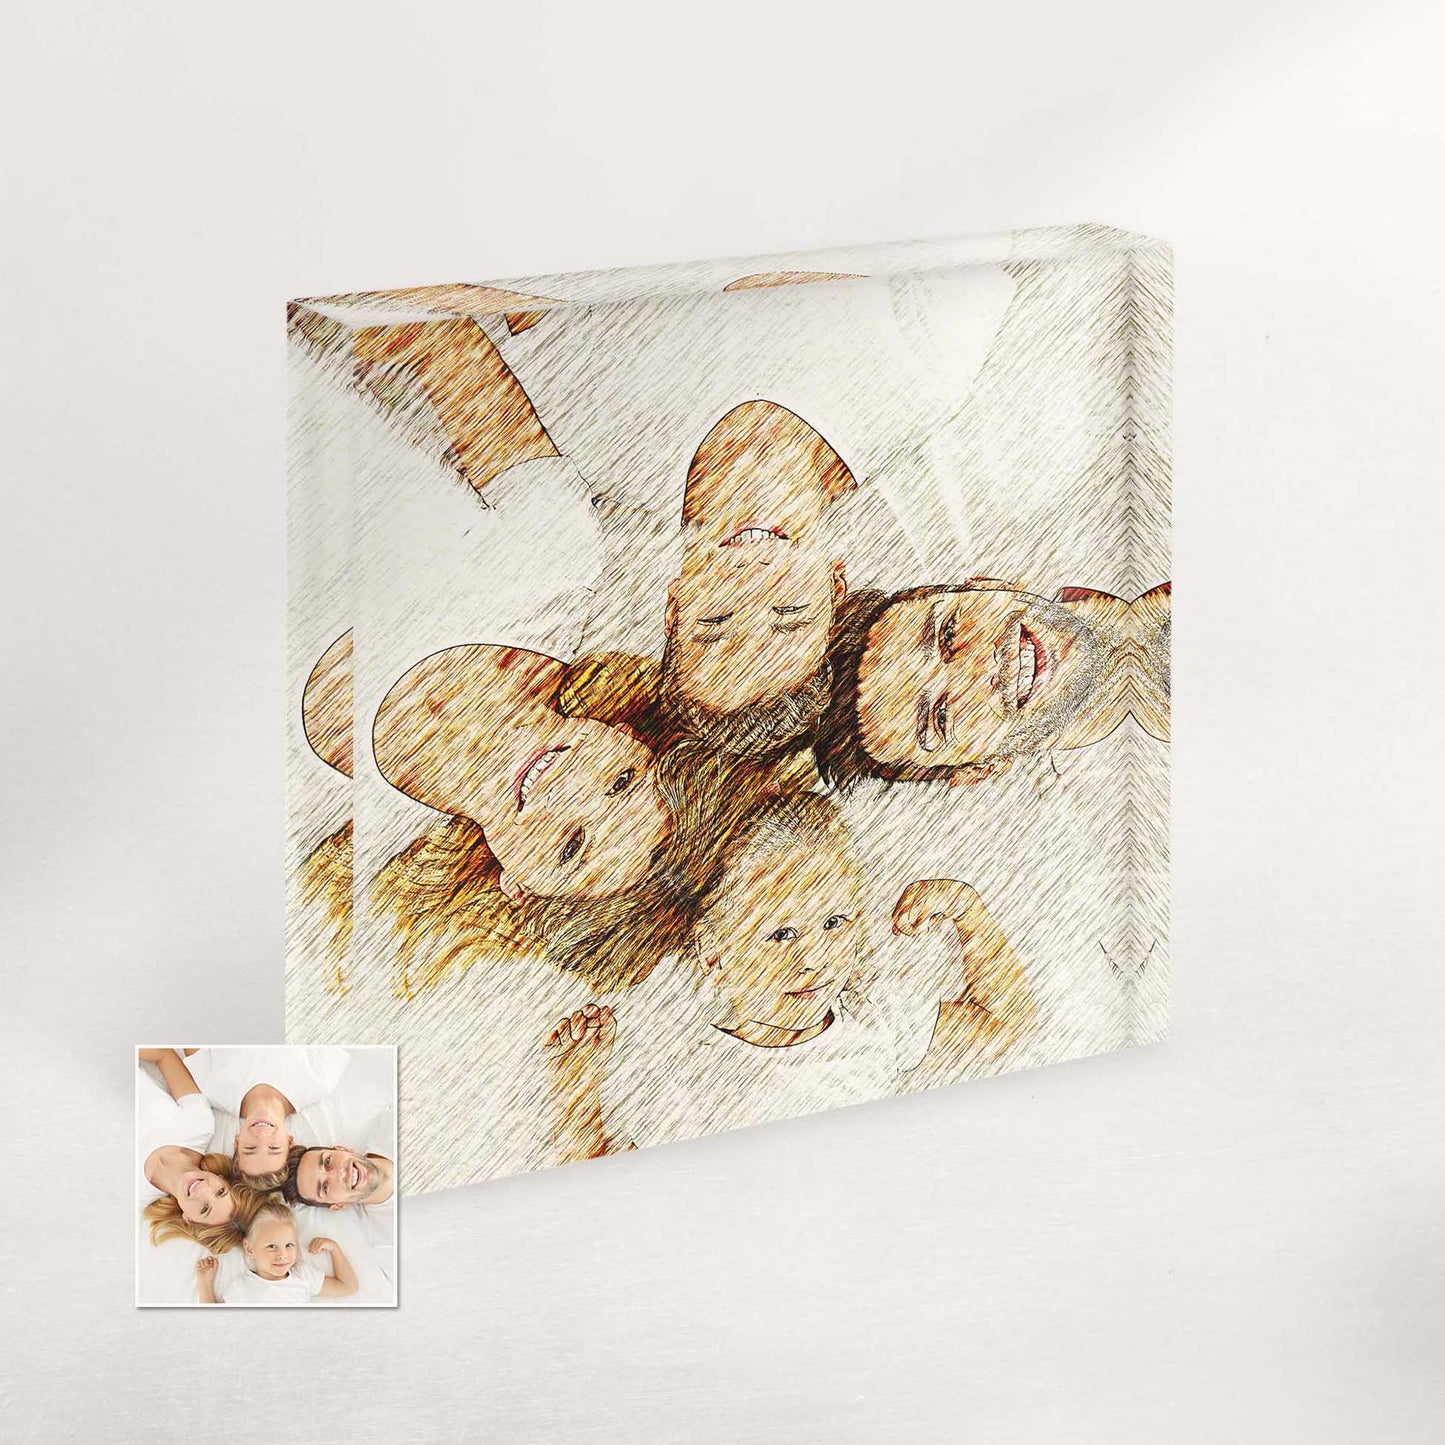 Personalized Artsy Illustration Acrylic Block Photo: The Perfect Family and Friends Gift: Surprise your loved ones with a truly special gift. Our acrylic block photos, featuring original and cool artsy illustrations